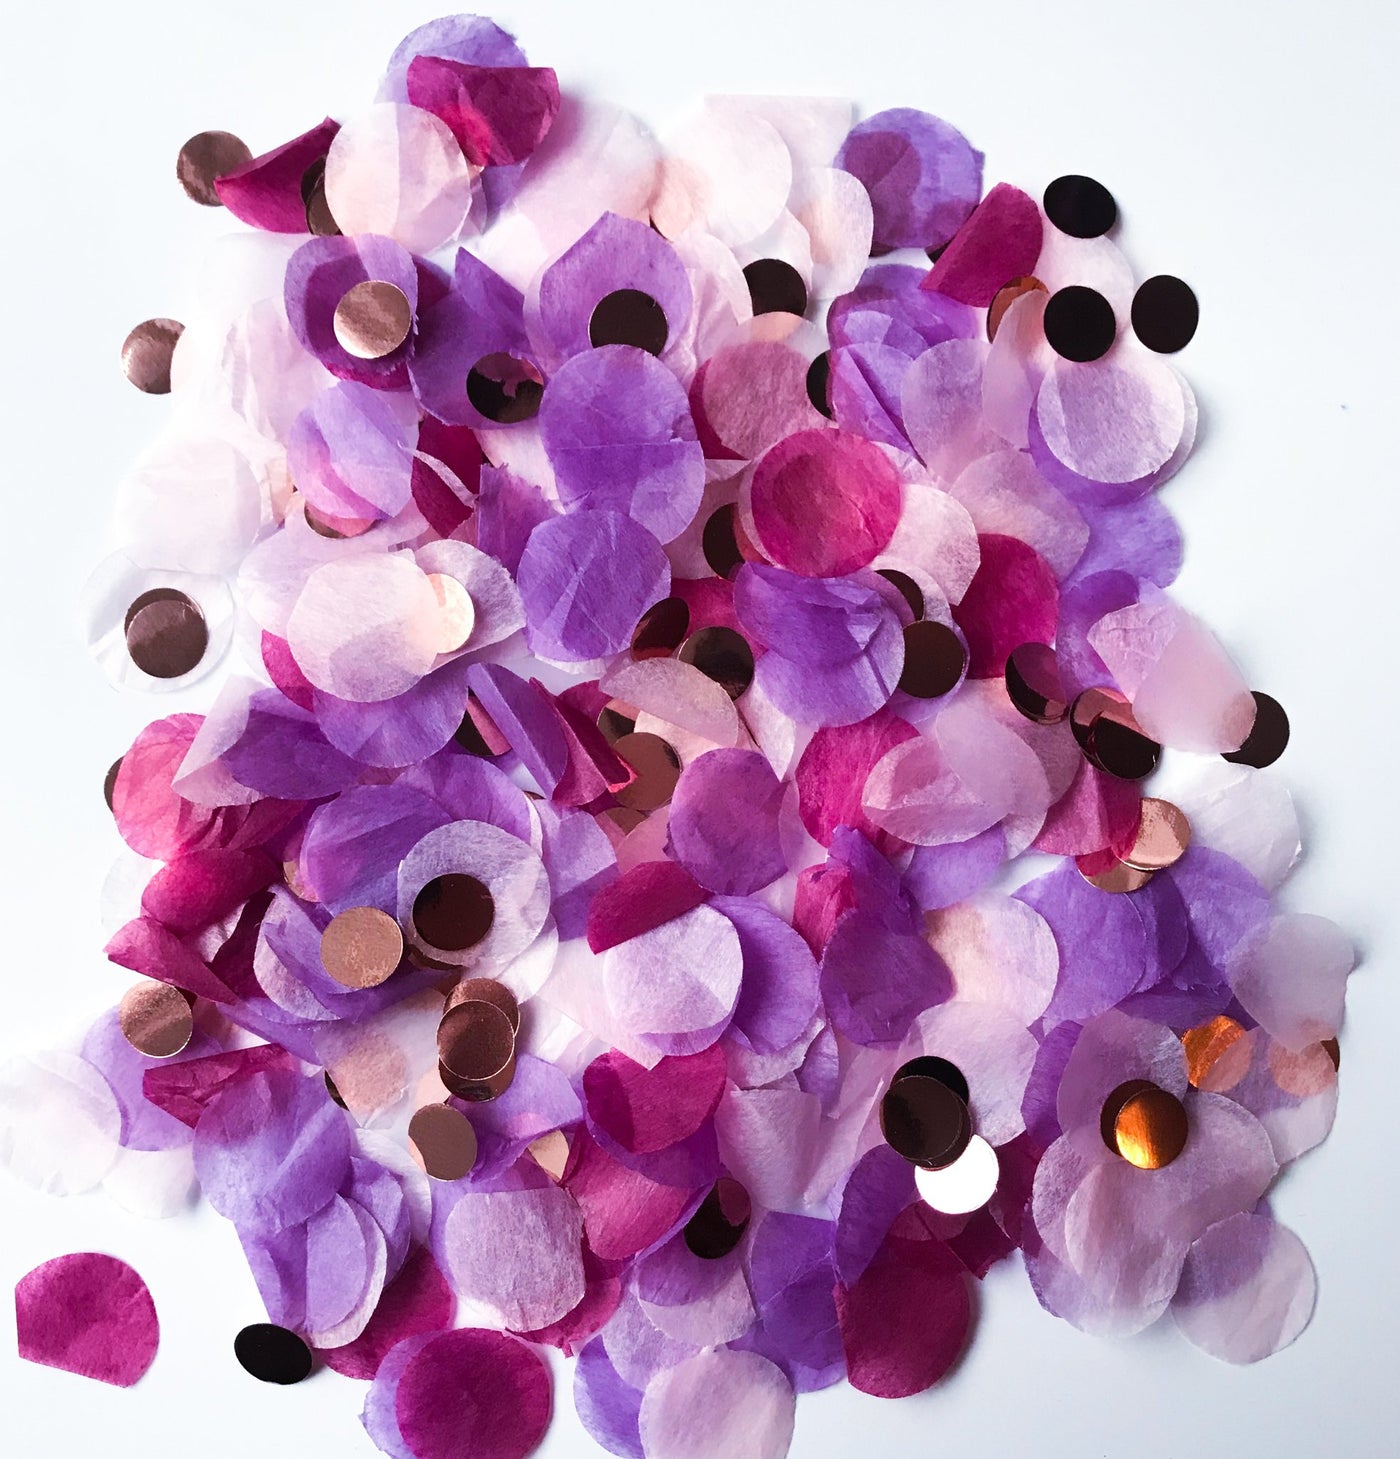 Confetti Balloon Purple Fairy - confetti of varying shades of purple and red accompanied with gold or copper colored foils